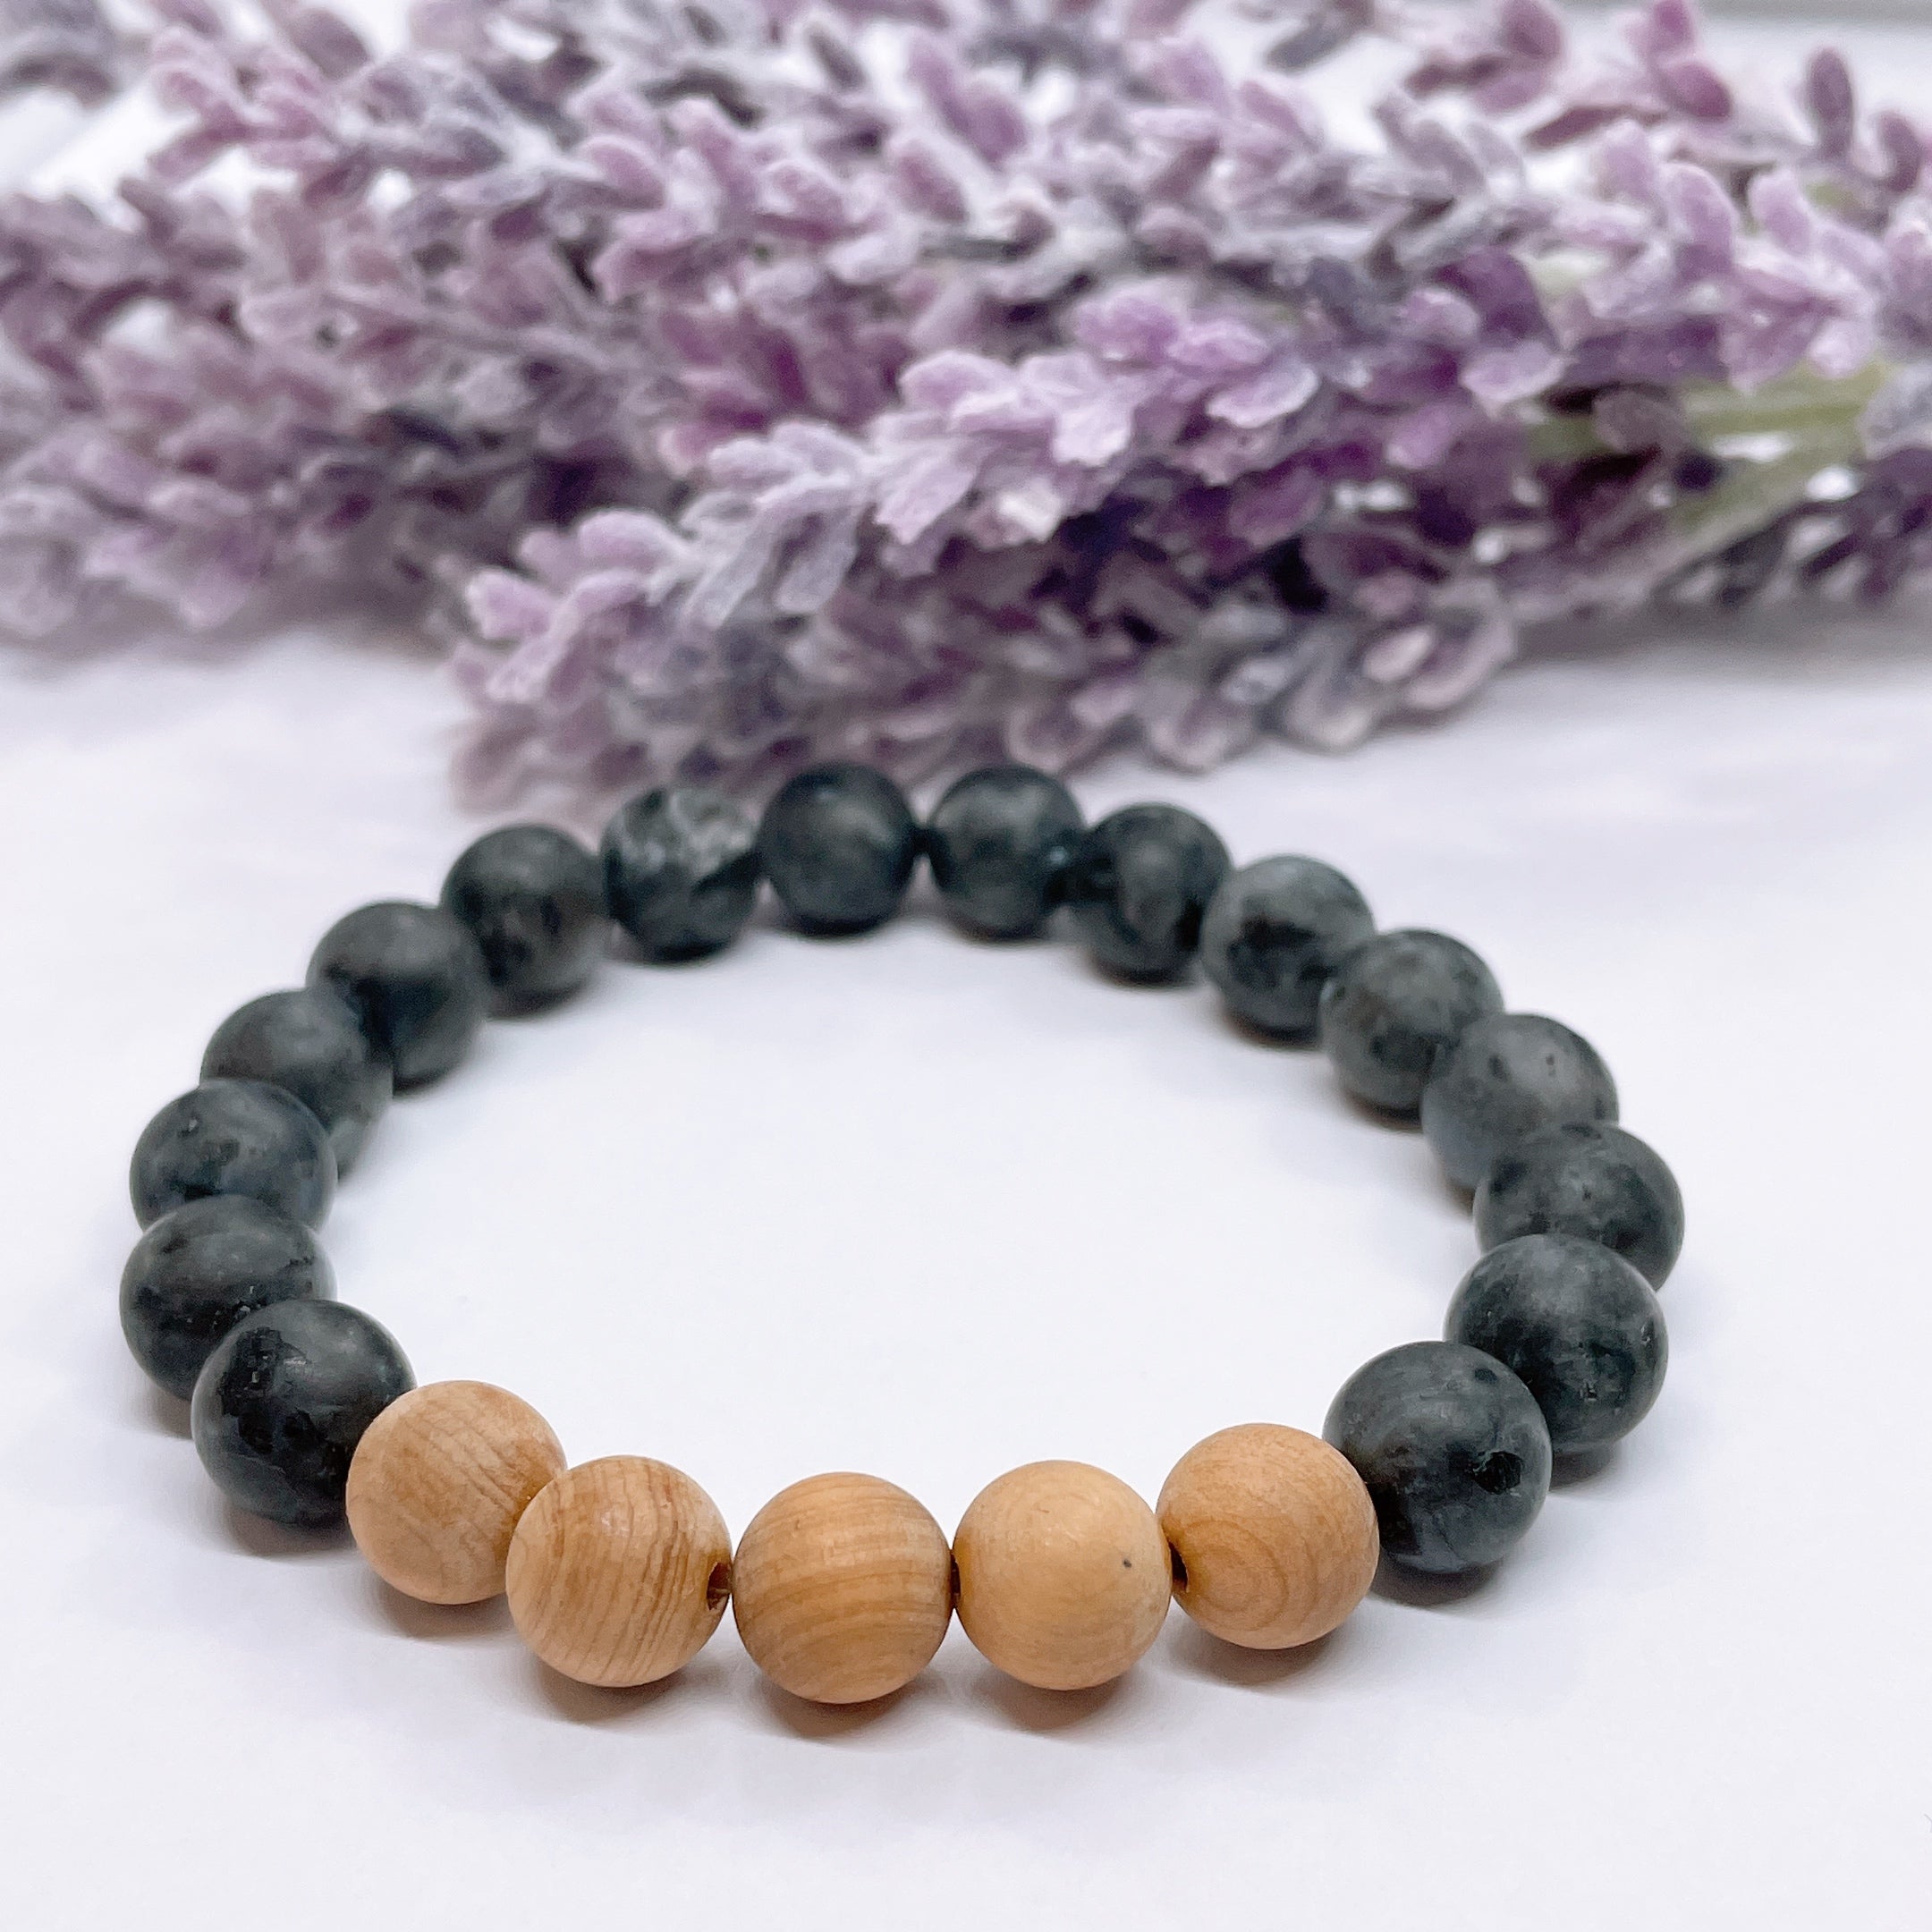 A black beaded bracelet with 16 black labradorite beads with 5 cedar wood brown beads on a white table with a purple flower on the table.